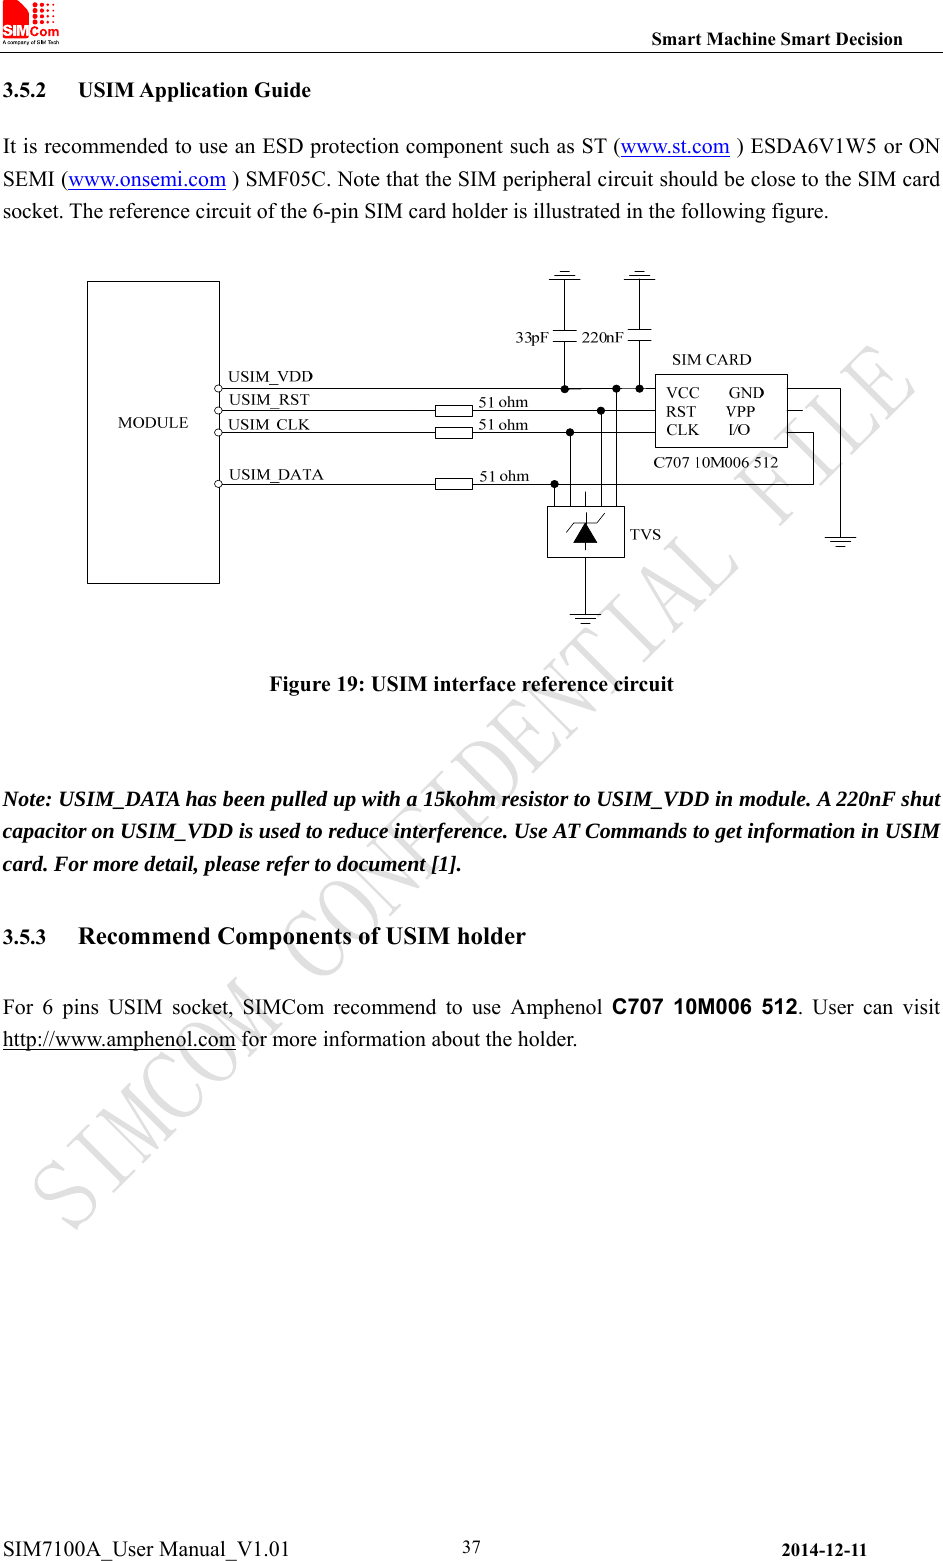                                                                Smart Machine Smart Decision SIM7100A_User Manual_V1.01                2014-12-11 373.5.2 USIM Application Guide It is recommended to use an ESD protection component such as ST (www.st.com ) ESDA6V1W5 or ON SEMI (www.onsemi.com ) SMF05C. Note that the SIM peripheral circuit should be close to the SIM card socket. The reference circuit of the 6-pin SIM card holder is illustrated in the following figure.  Figure 19: USIM interface reference circuit  Note: USIM_DATA has been pulled up with a 15kohm resistor to USIM_VDD in module. A 220nF shut capacitor on USIM_VDD is used to reduce interference. Use AT Commands to get information in USIM card. For more detail, please refer to document [1]. 3.5.3 Recommend Components of USIM holder For  6  pins  USIM  socket,  SIMCom  recommend  to  use  Amphenol  C707  10M006  512.  User  can  visit http://www.amphenol.com for more information about the holder.  